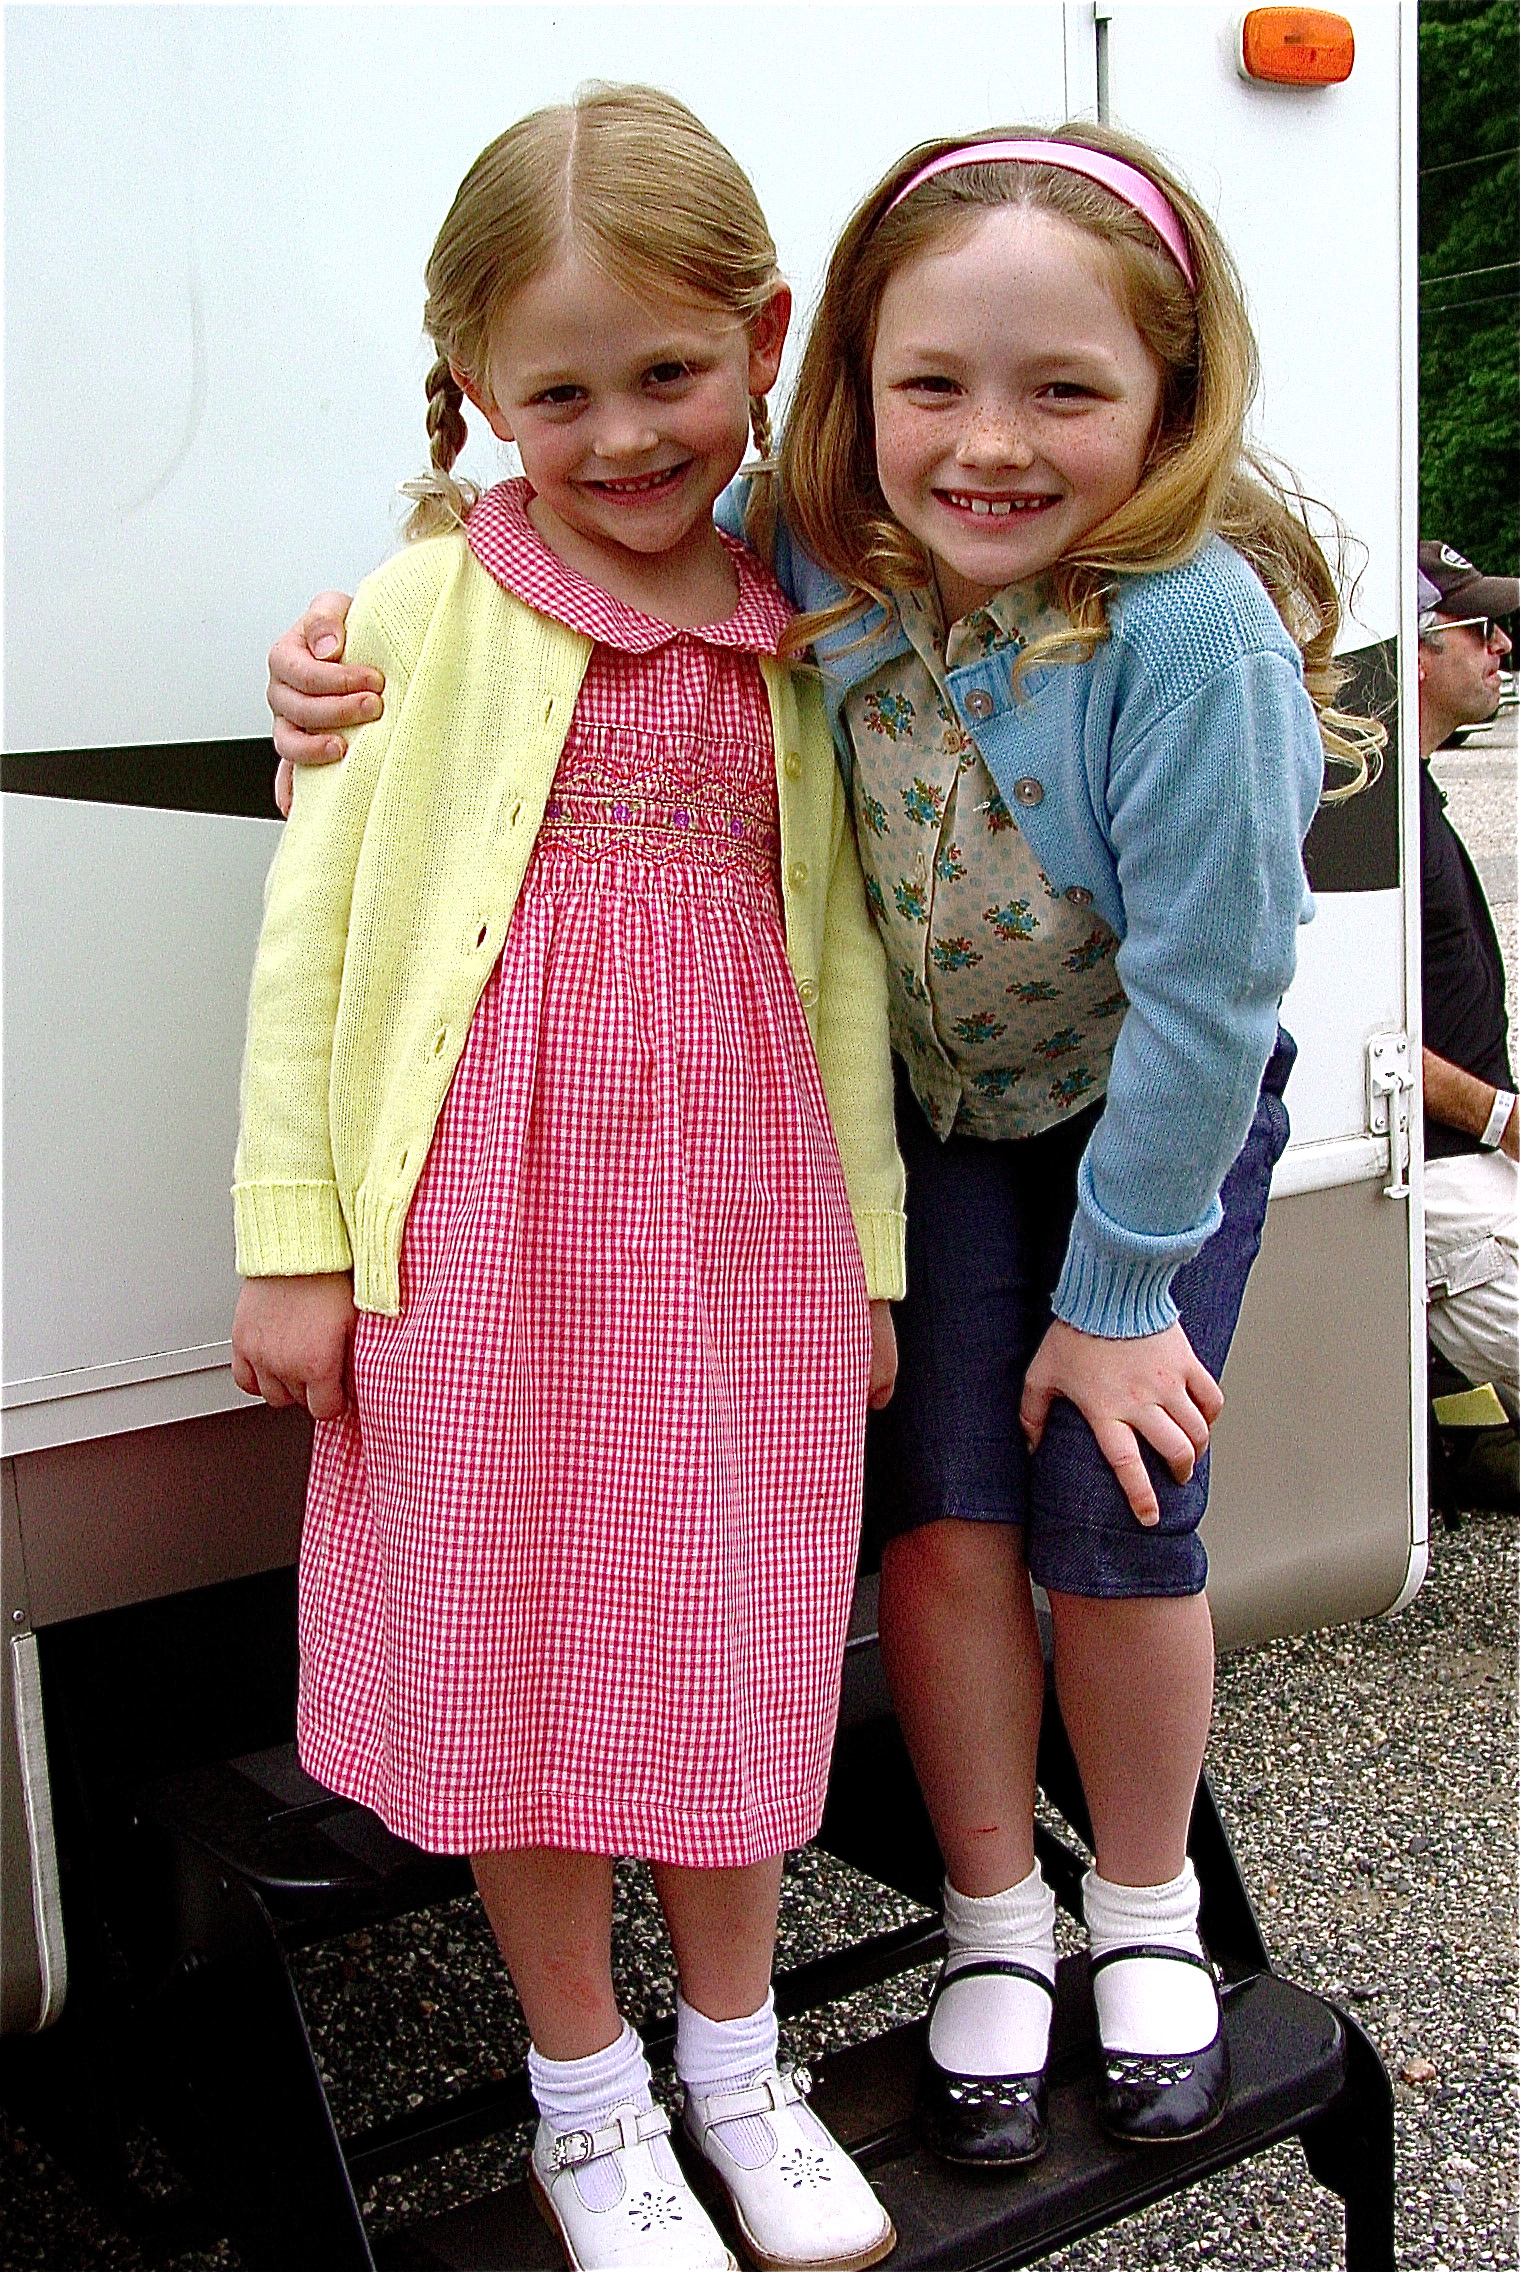 Natalie Alyn Lind with co-star Emiy Alyn Lind on the set of Blood Done Sign My Name